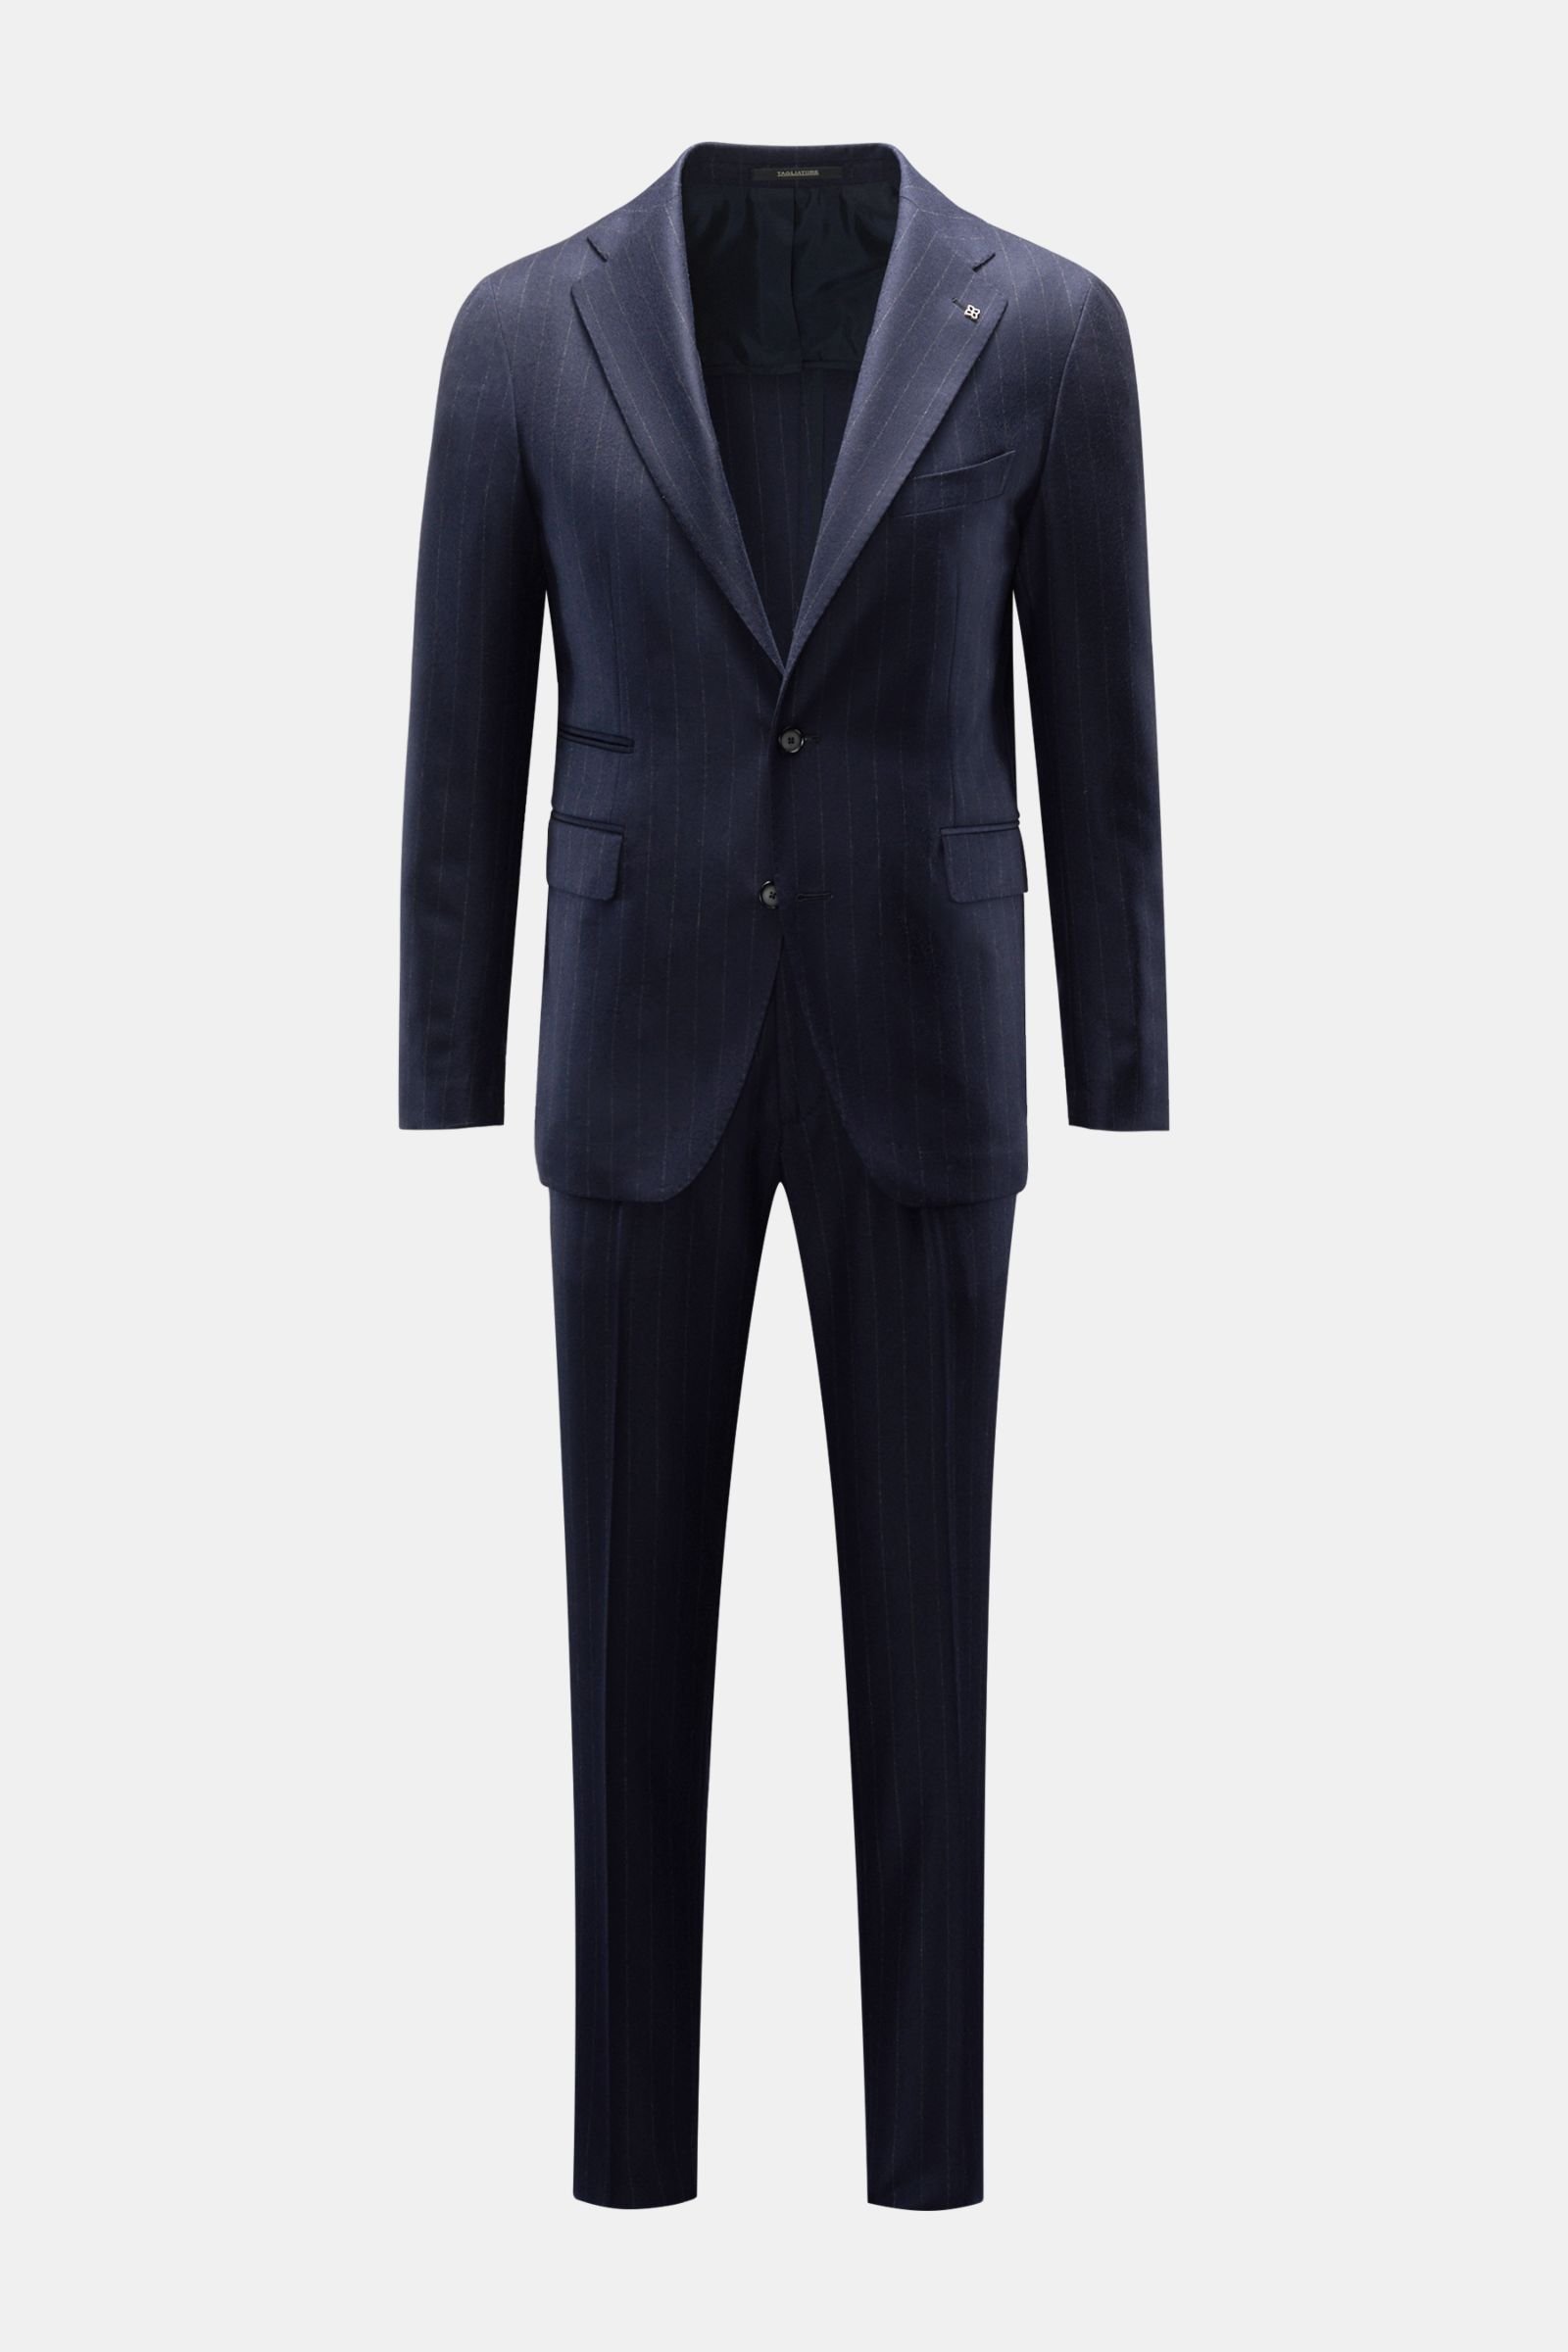 Suit navy striped